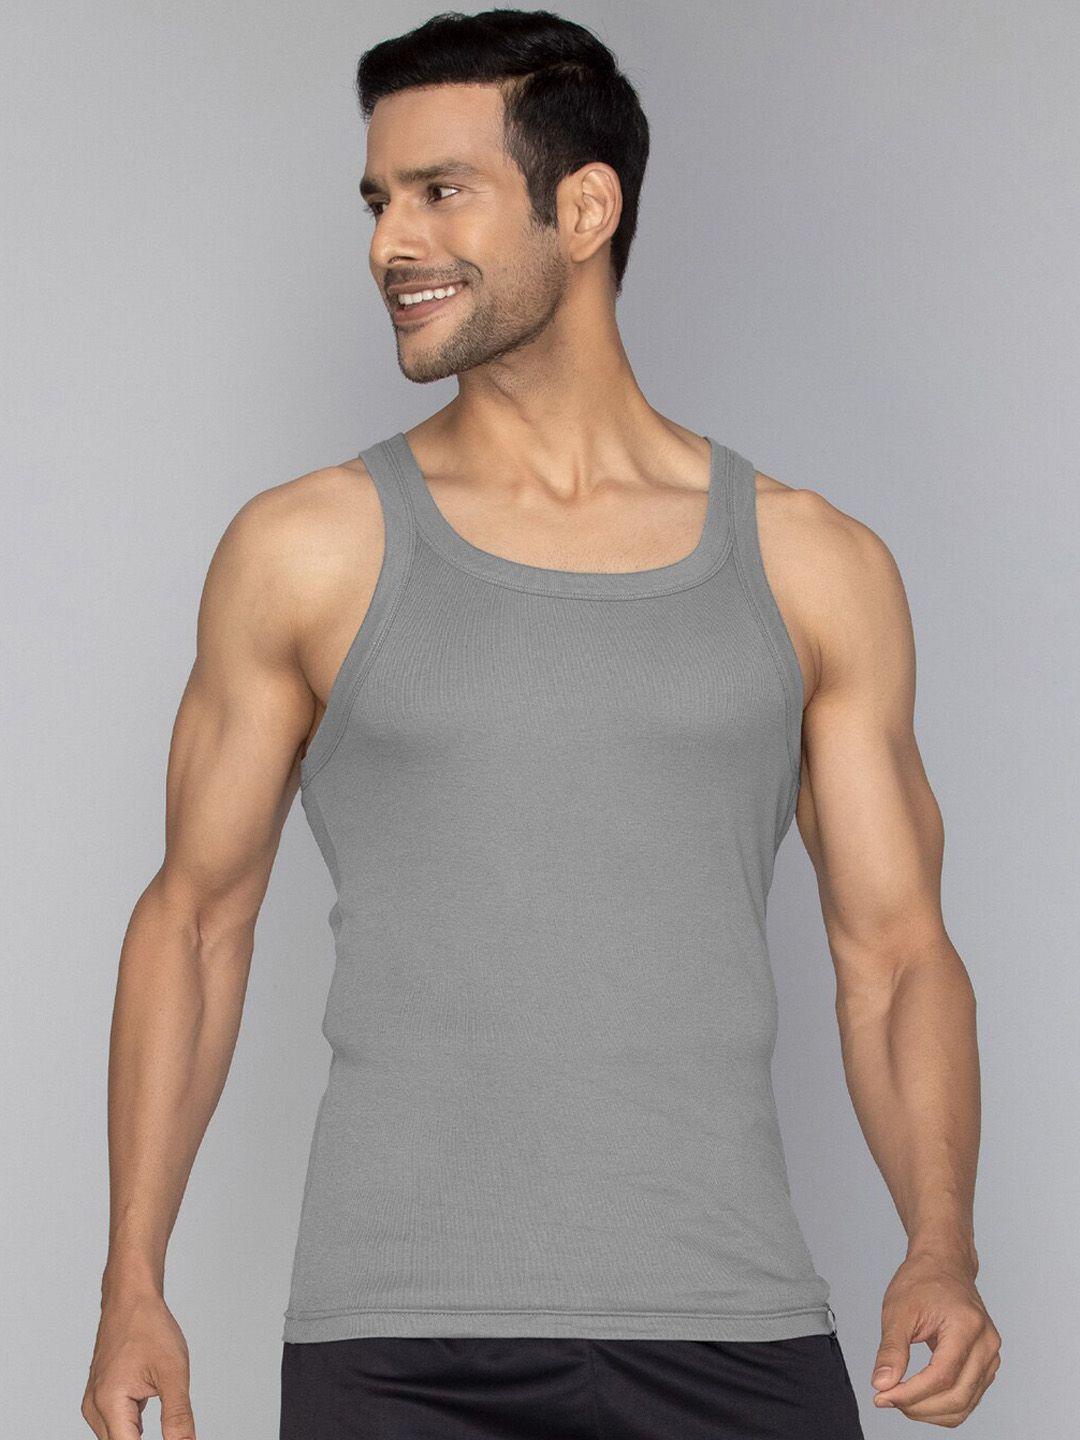 xyxx-anti-bacterial-super-combed-cotton-innerwear-gym-vest